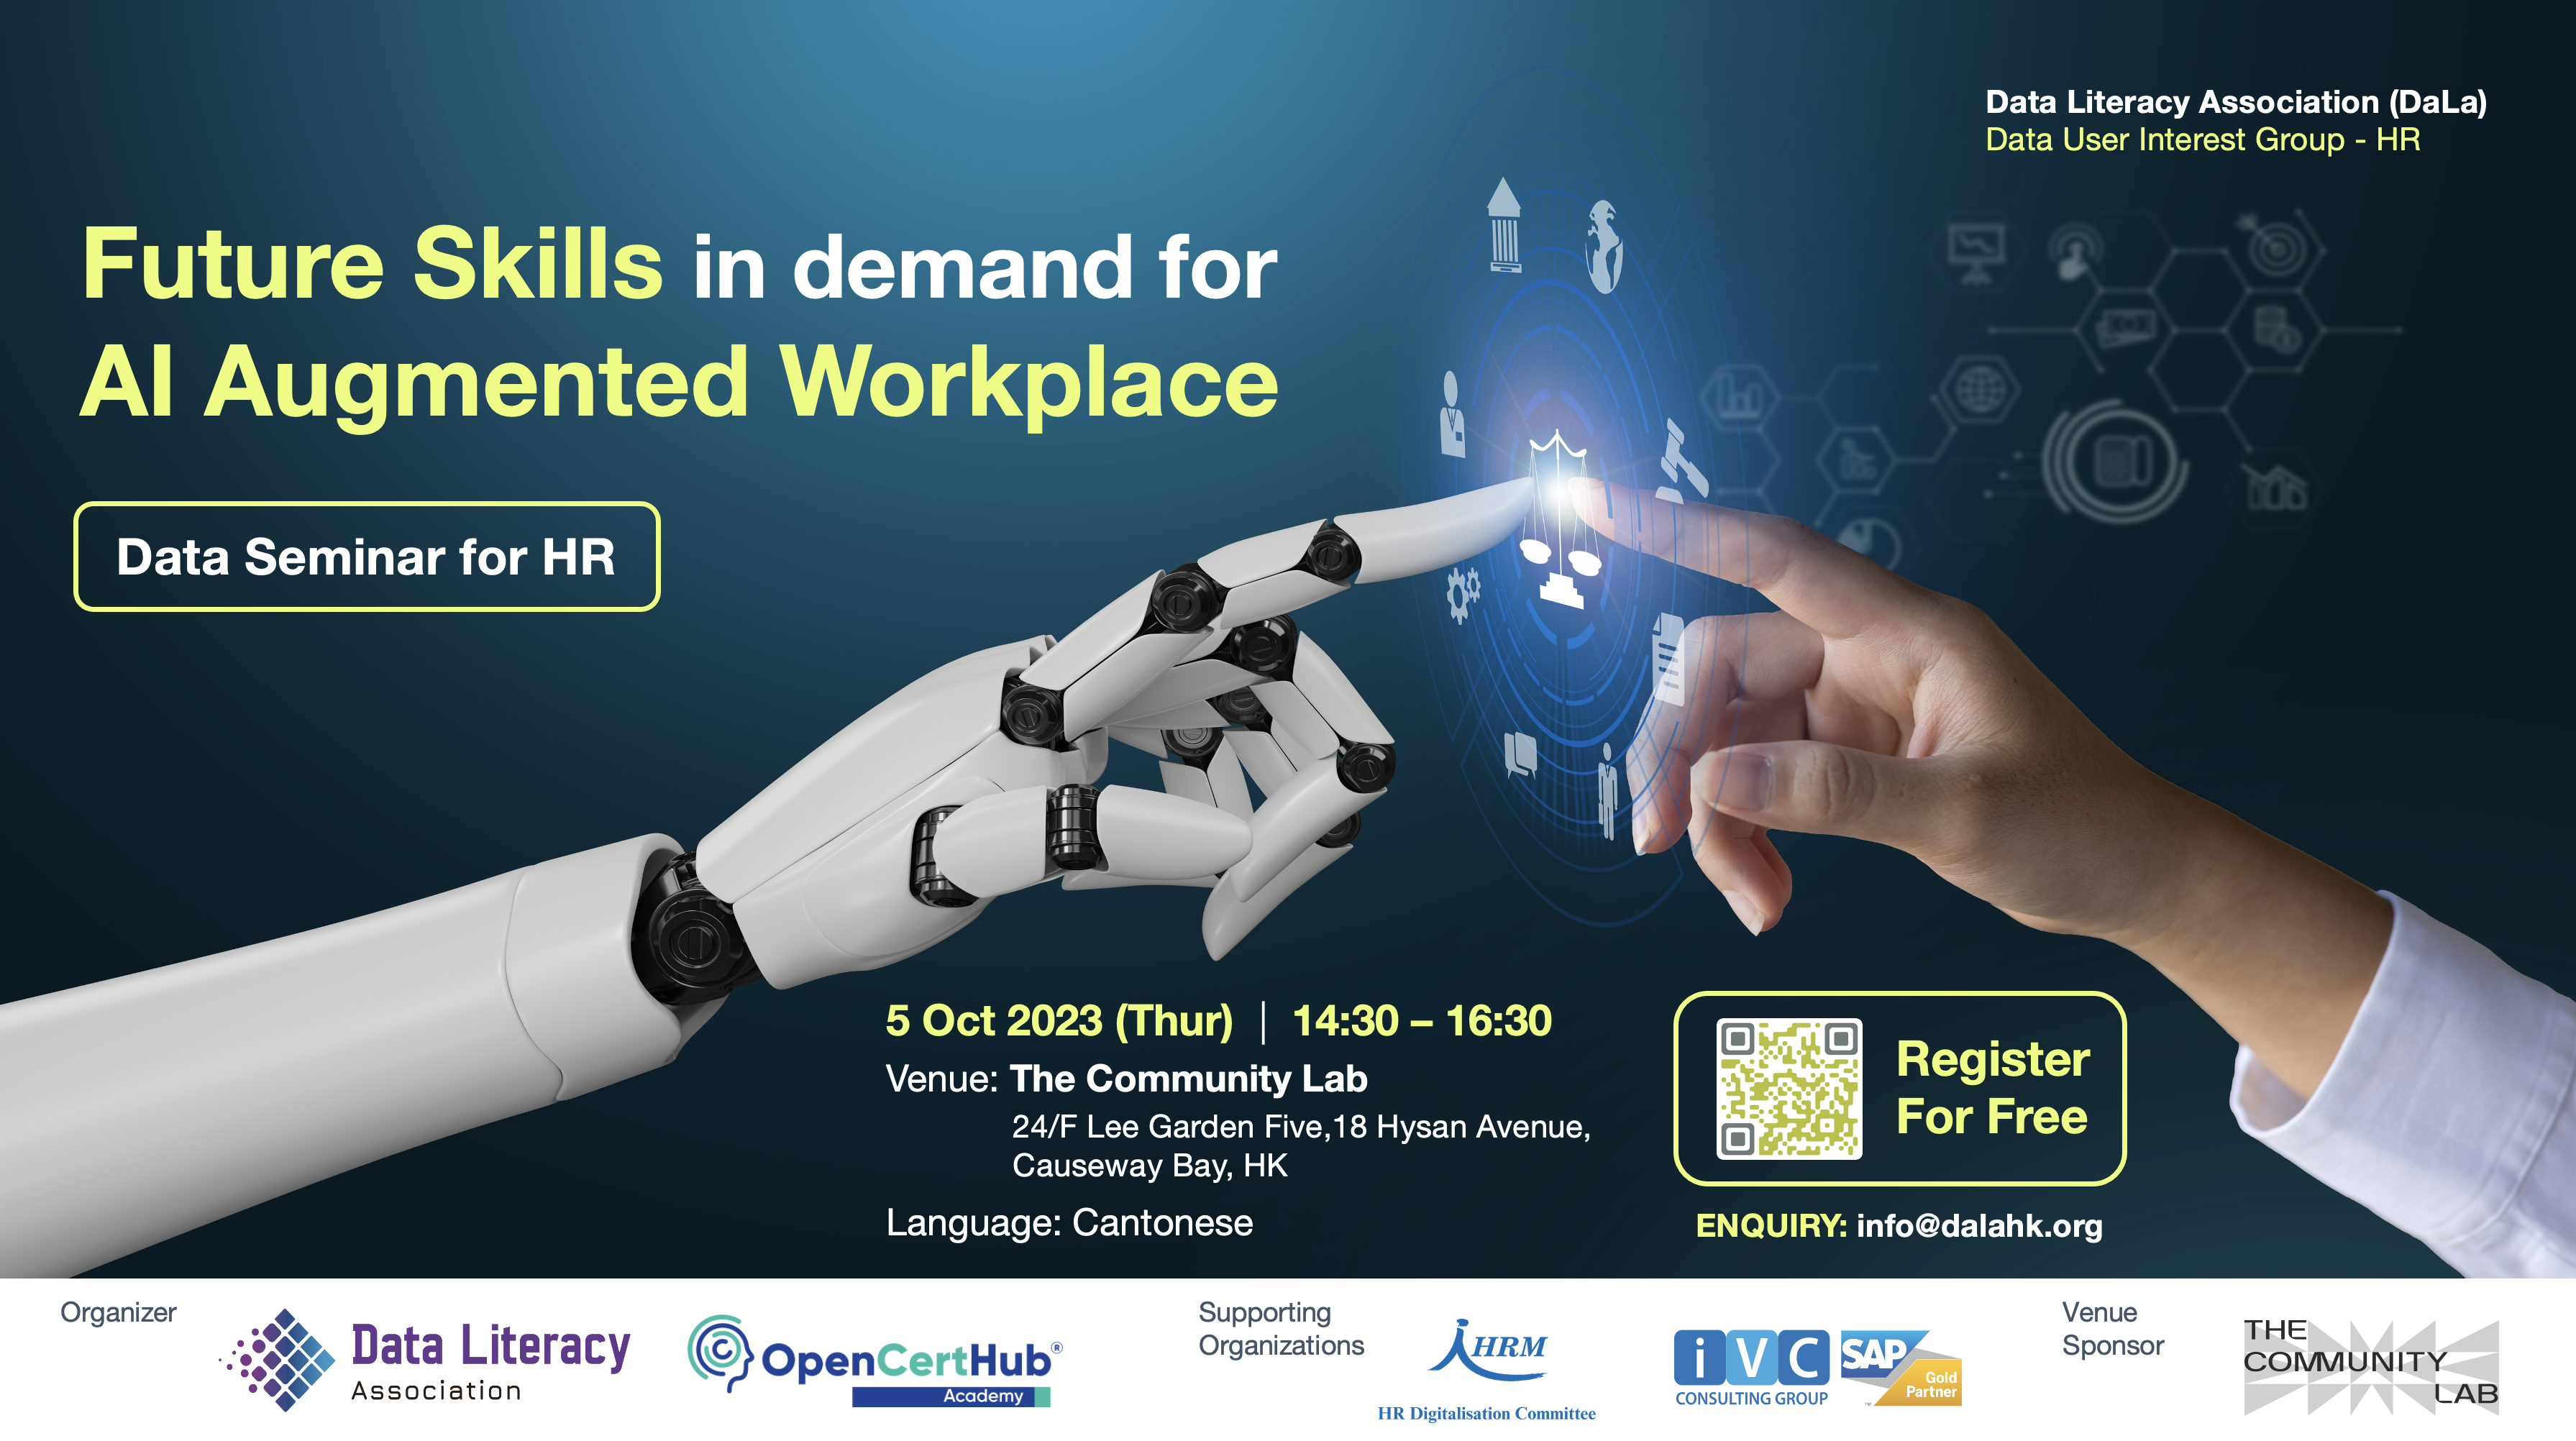 Upcoming Event – Data Seminar for HR: Future Skills in Demand for AI Augmented Workplace